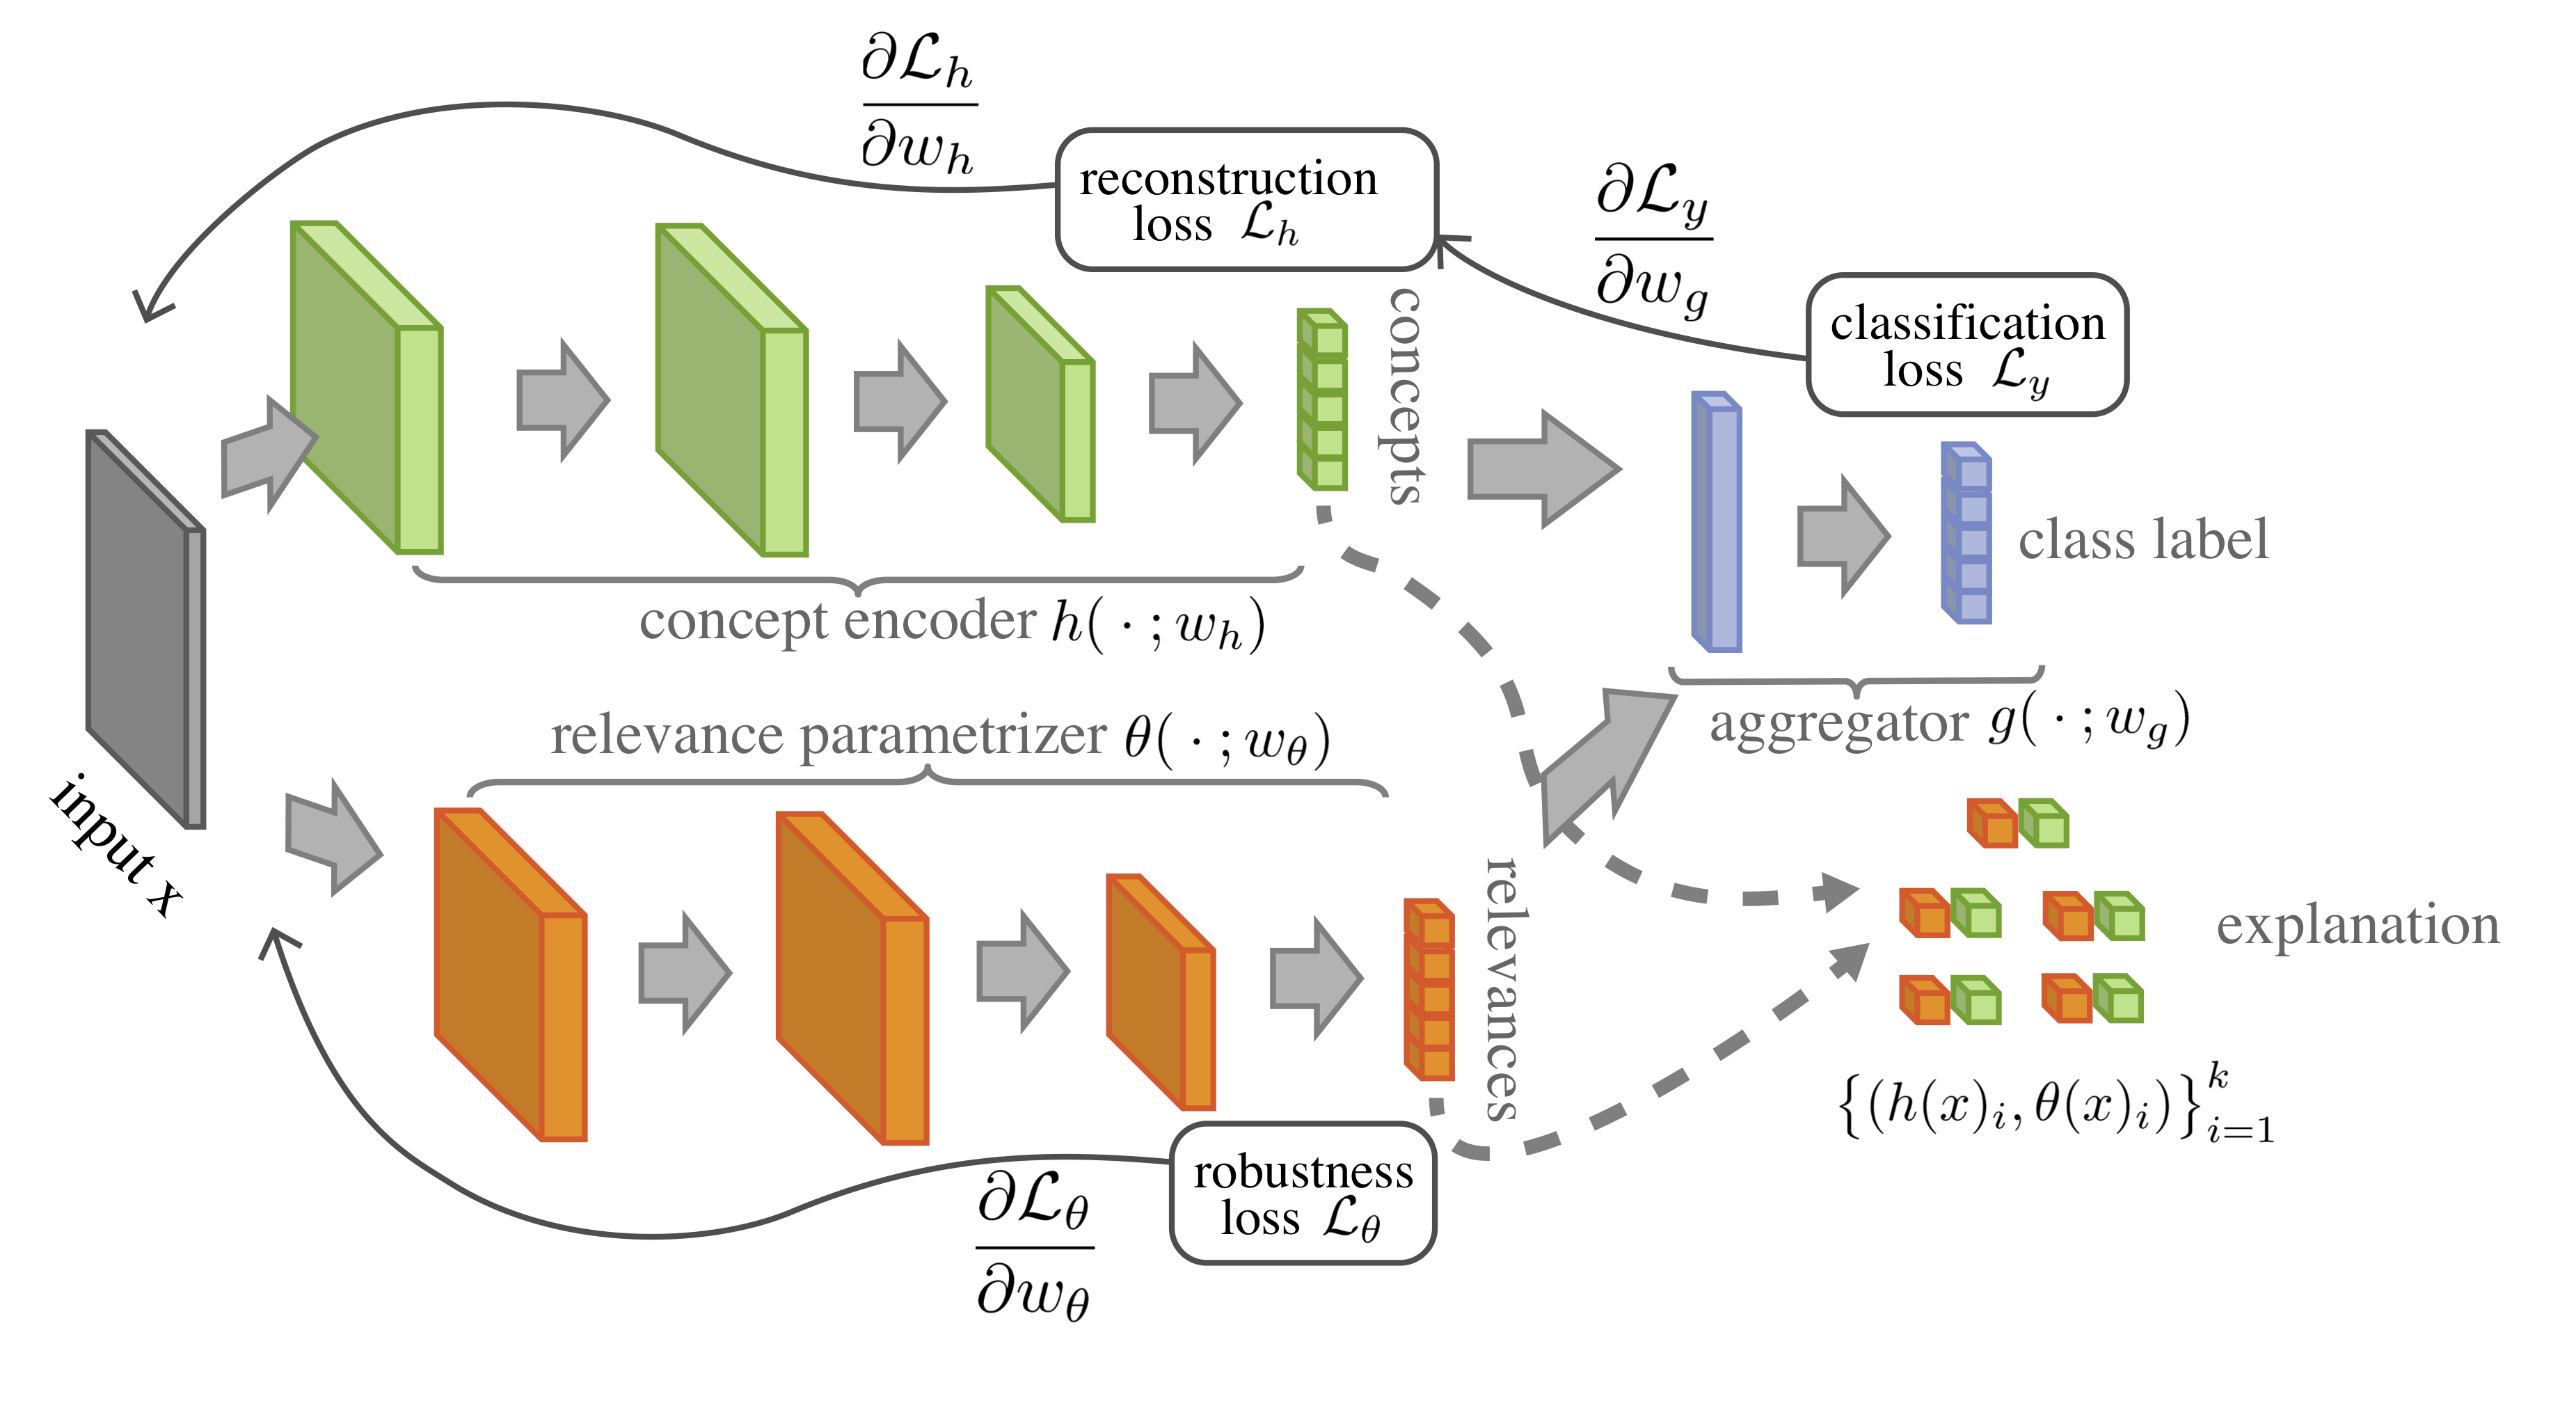 A Self-Explaining Neural Network consists of three components: a concept encoder (green) that transforms the input into a small set of interpretable basis features; an input-dependent parametrizer (orange) that generates relevance scores; and an aggregation function that combines to produce a prediction. The robustness loss on the parametrizer encourages the full model to behave locally as a linear function on $h(x)$ with parameters $\theta(x)$, yielding immediate interpretation of both concepts and relevances.